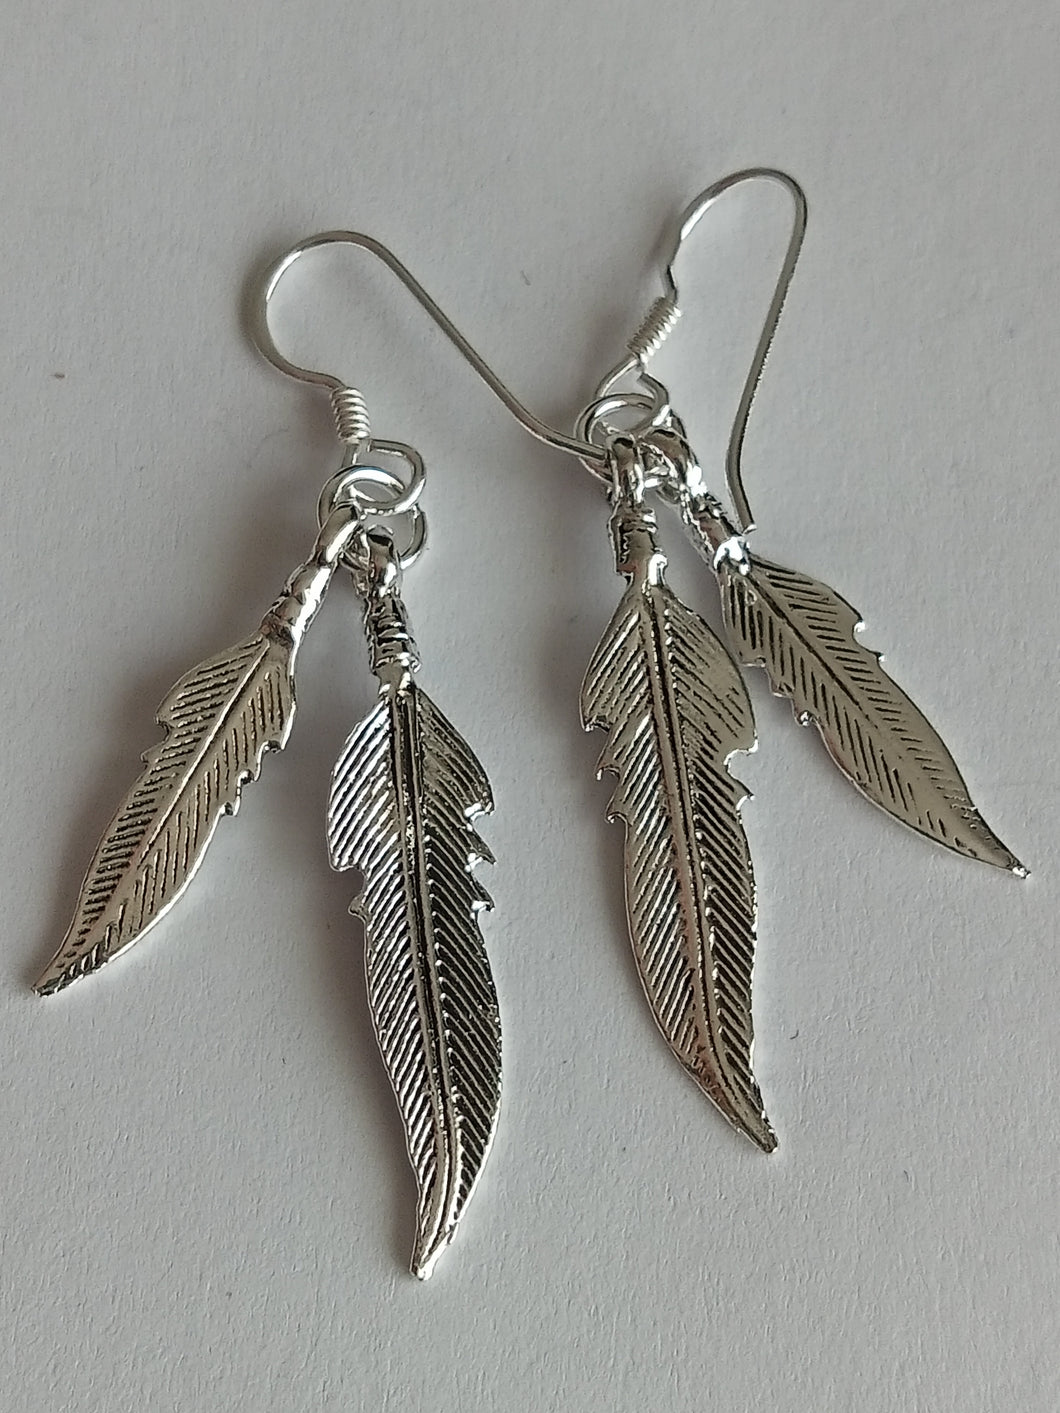 Two Pairs of Silver Feather Earrings